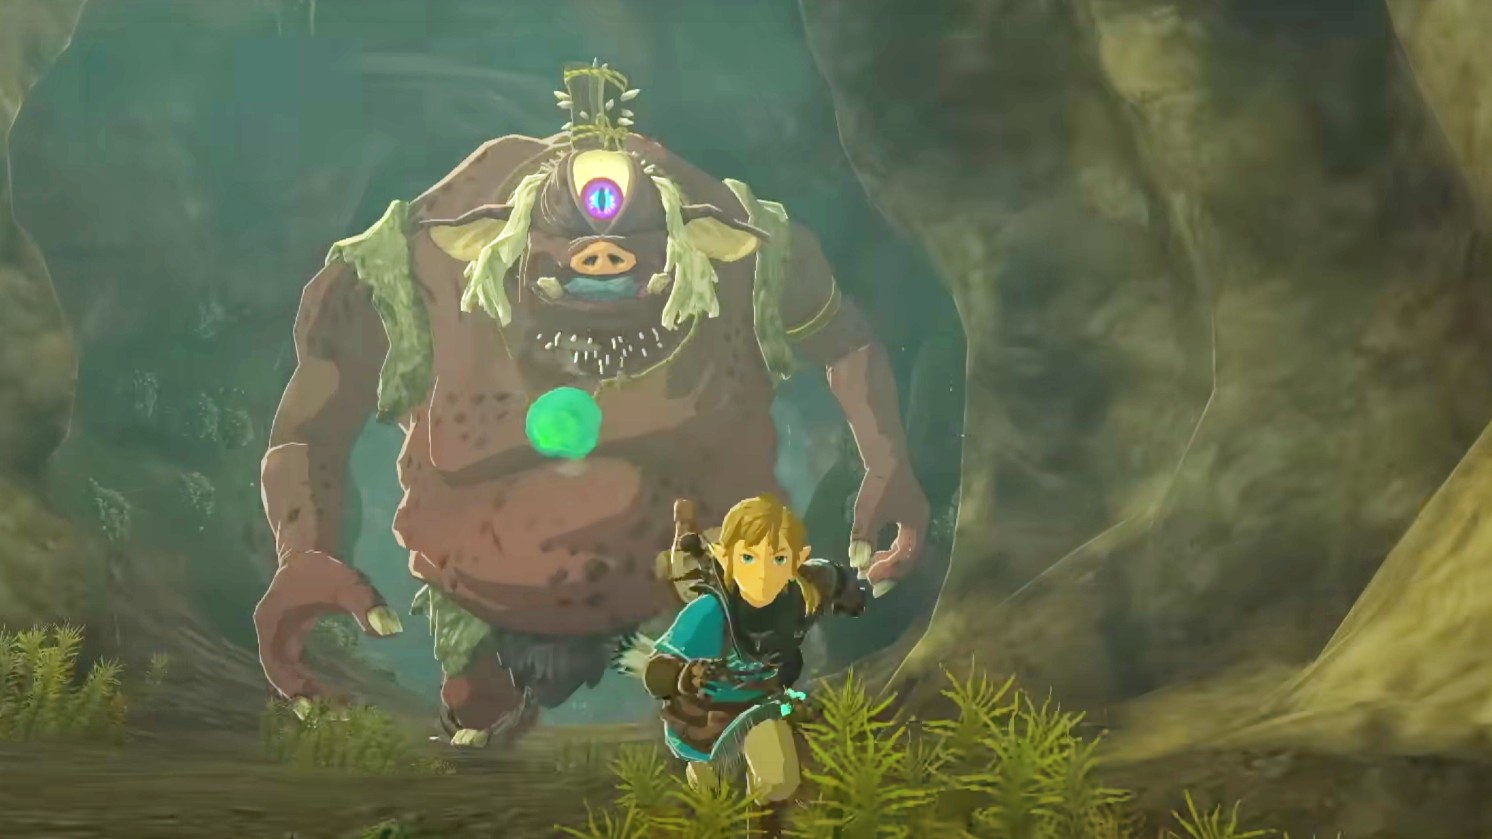 What's Next for The Legend of Zelda after Tears of the Kingdom?